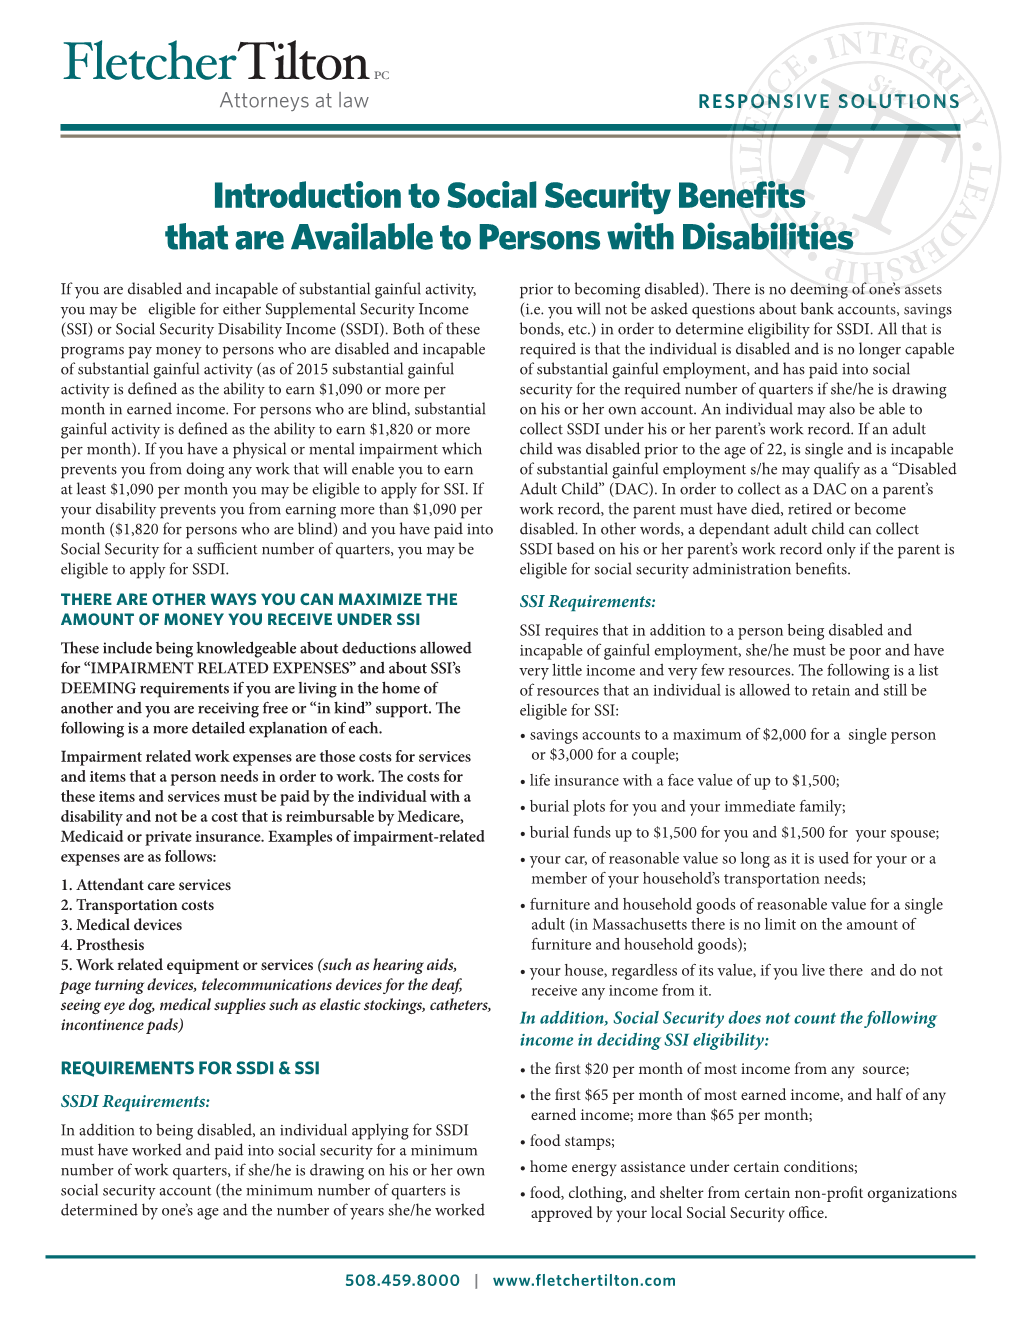 Introduction to Social Security Benefits That Are Available to Persons with Disabilities